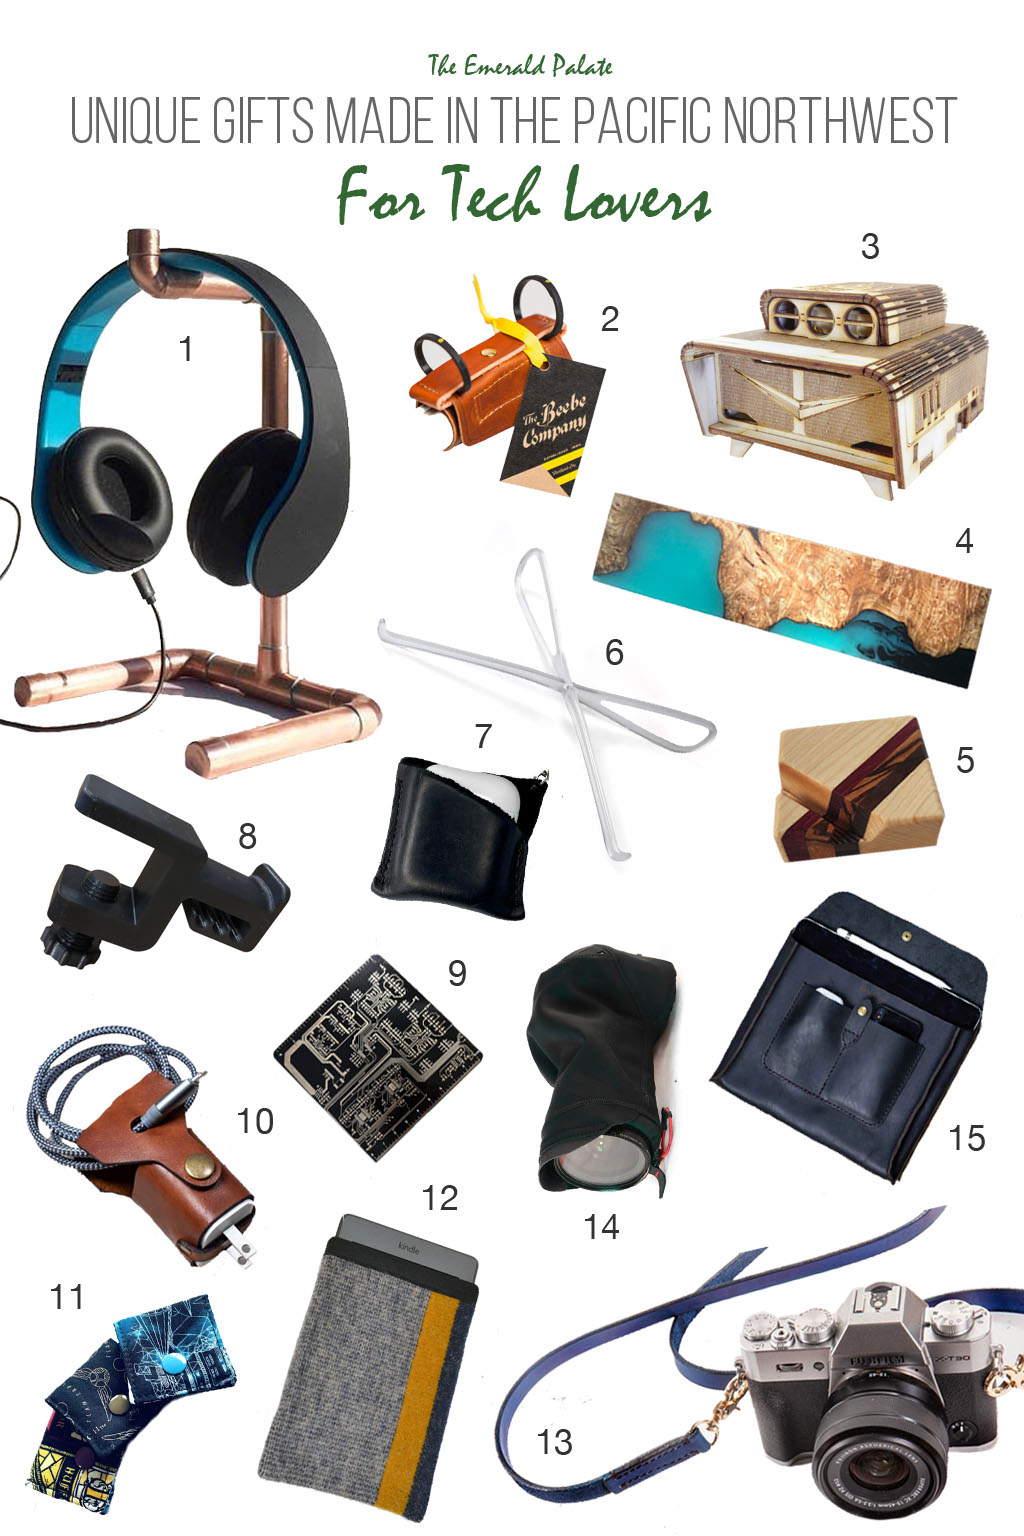 Pacific Northwest Gifts Guide tech lovers 1